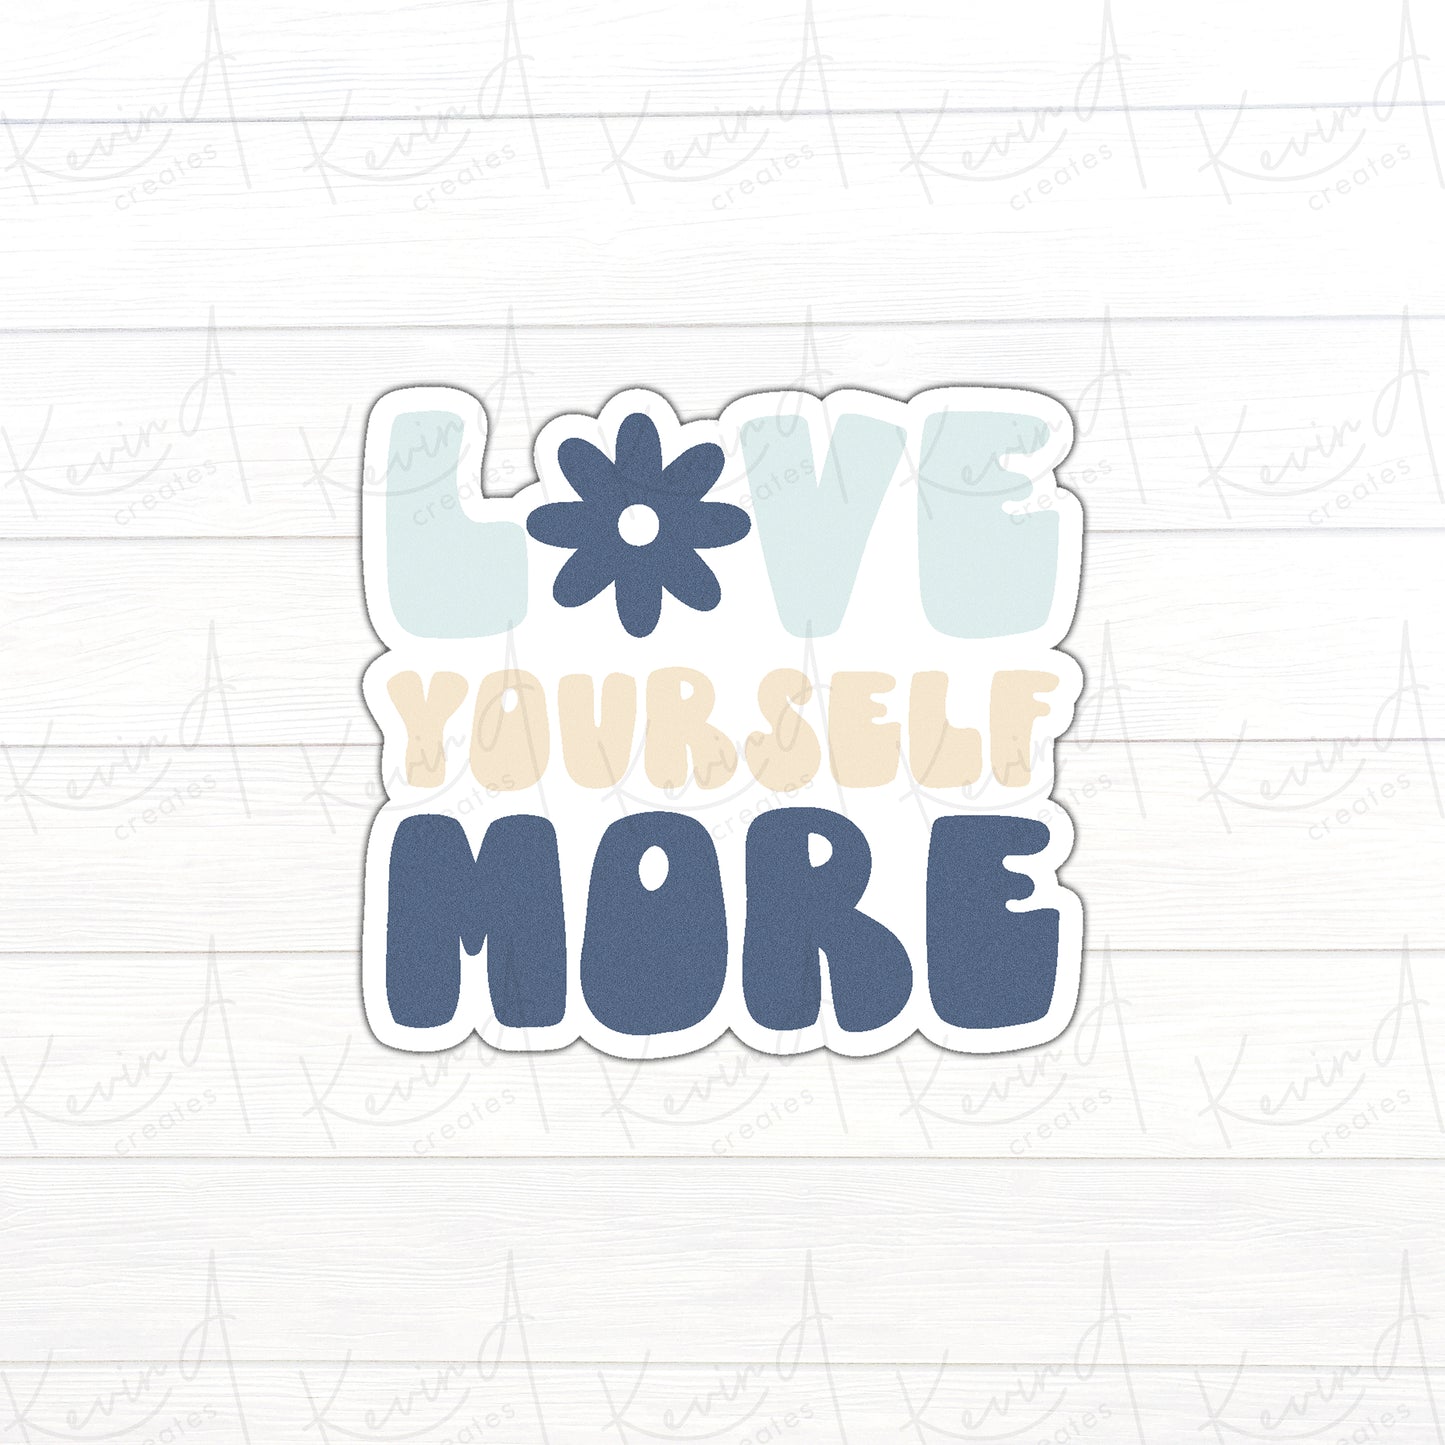 DC-042, "Love Yourself More" Mental Health Die Cut Stickers